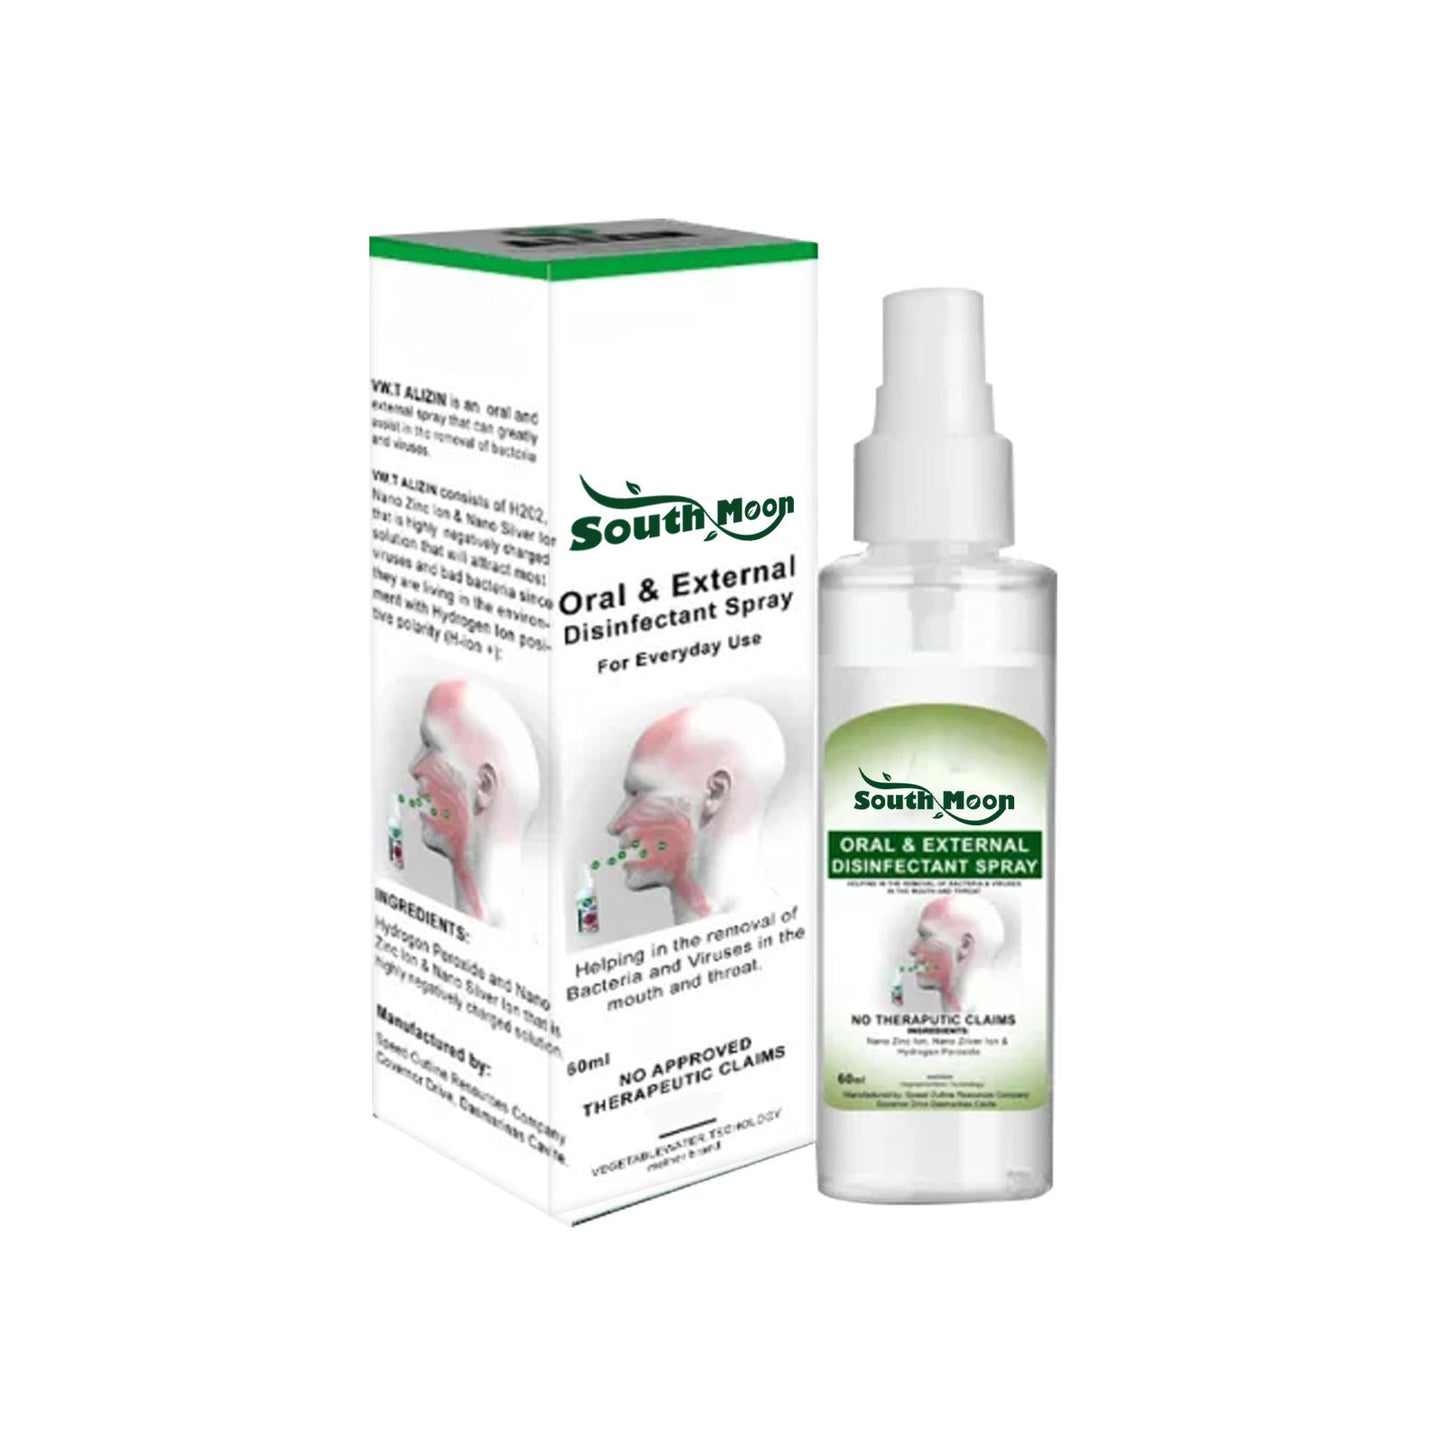 South Moon Oral Spray To Relieve Dry, Itchy And Uncomfortable Mouth, Gum Repair, Bad Breath And Breath Freshener (60ml)